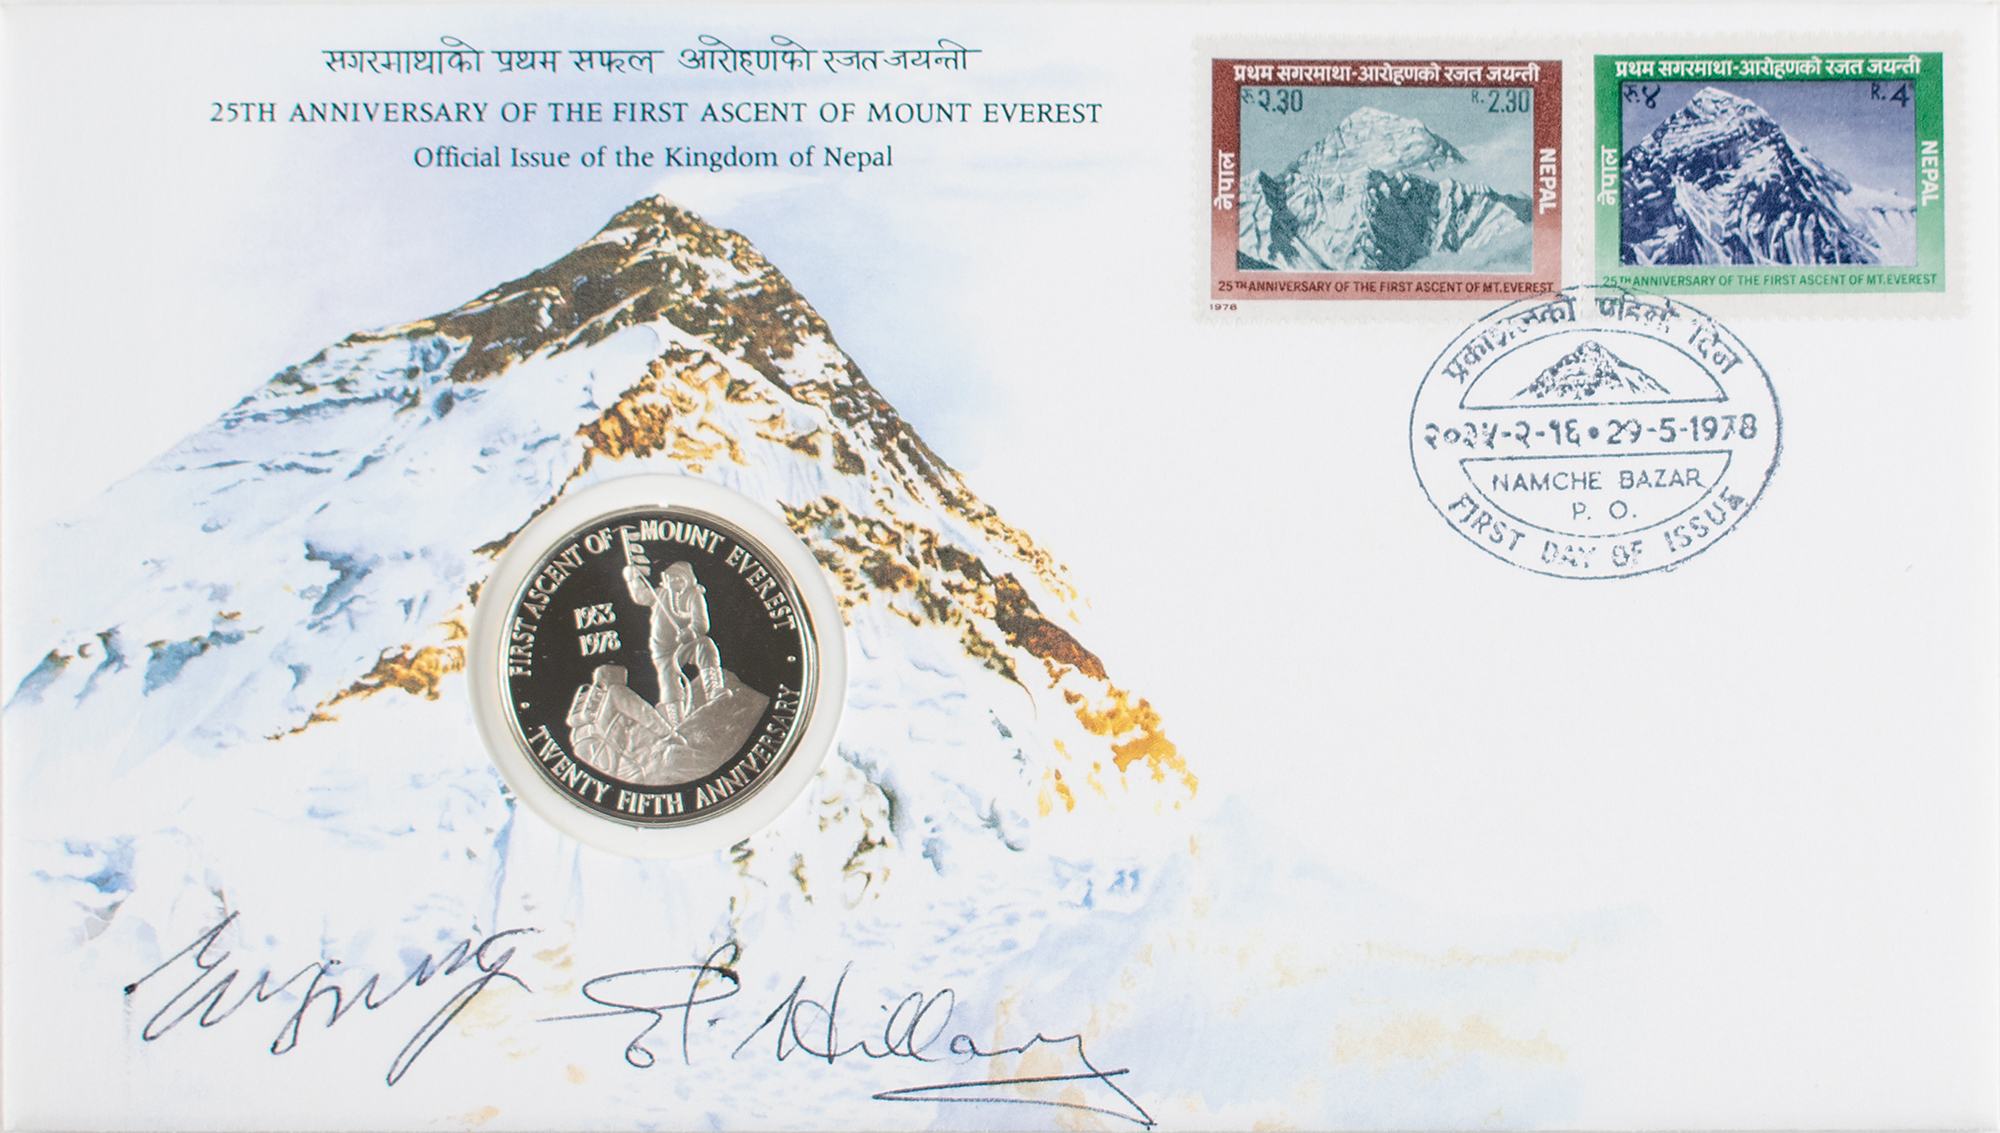 Lot #267 Edmund Hillary and Tenzing Norgay Signed Commemorative Cover